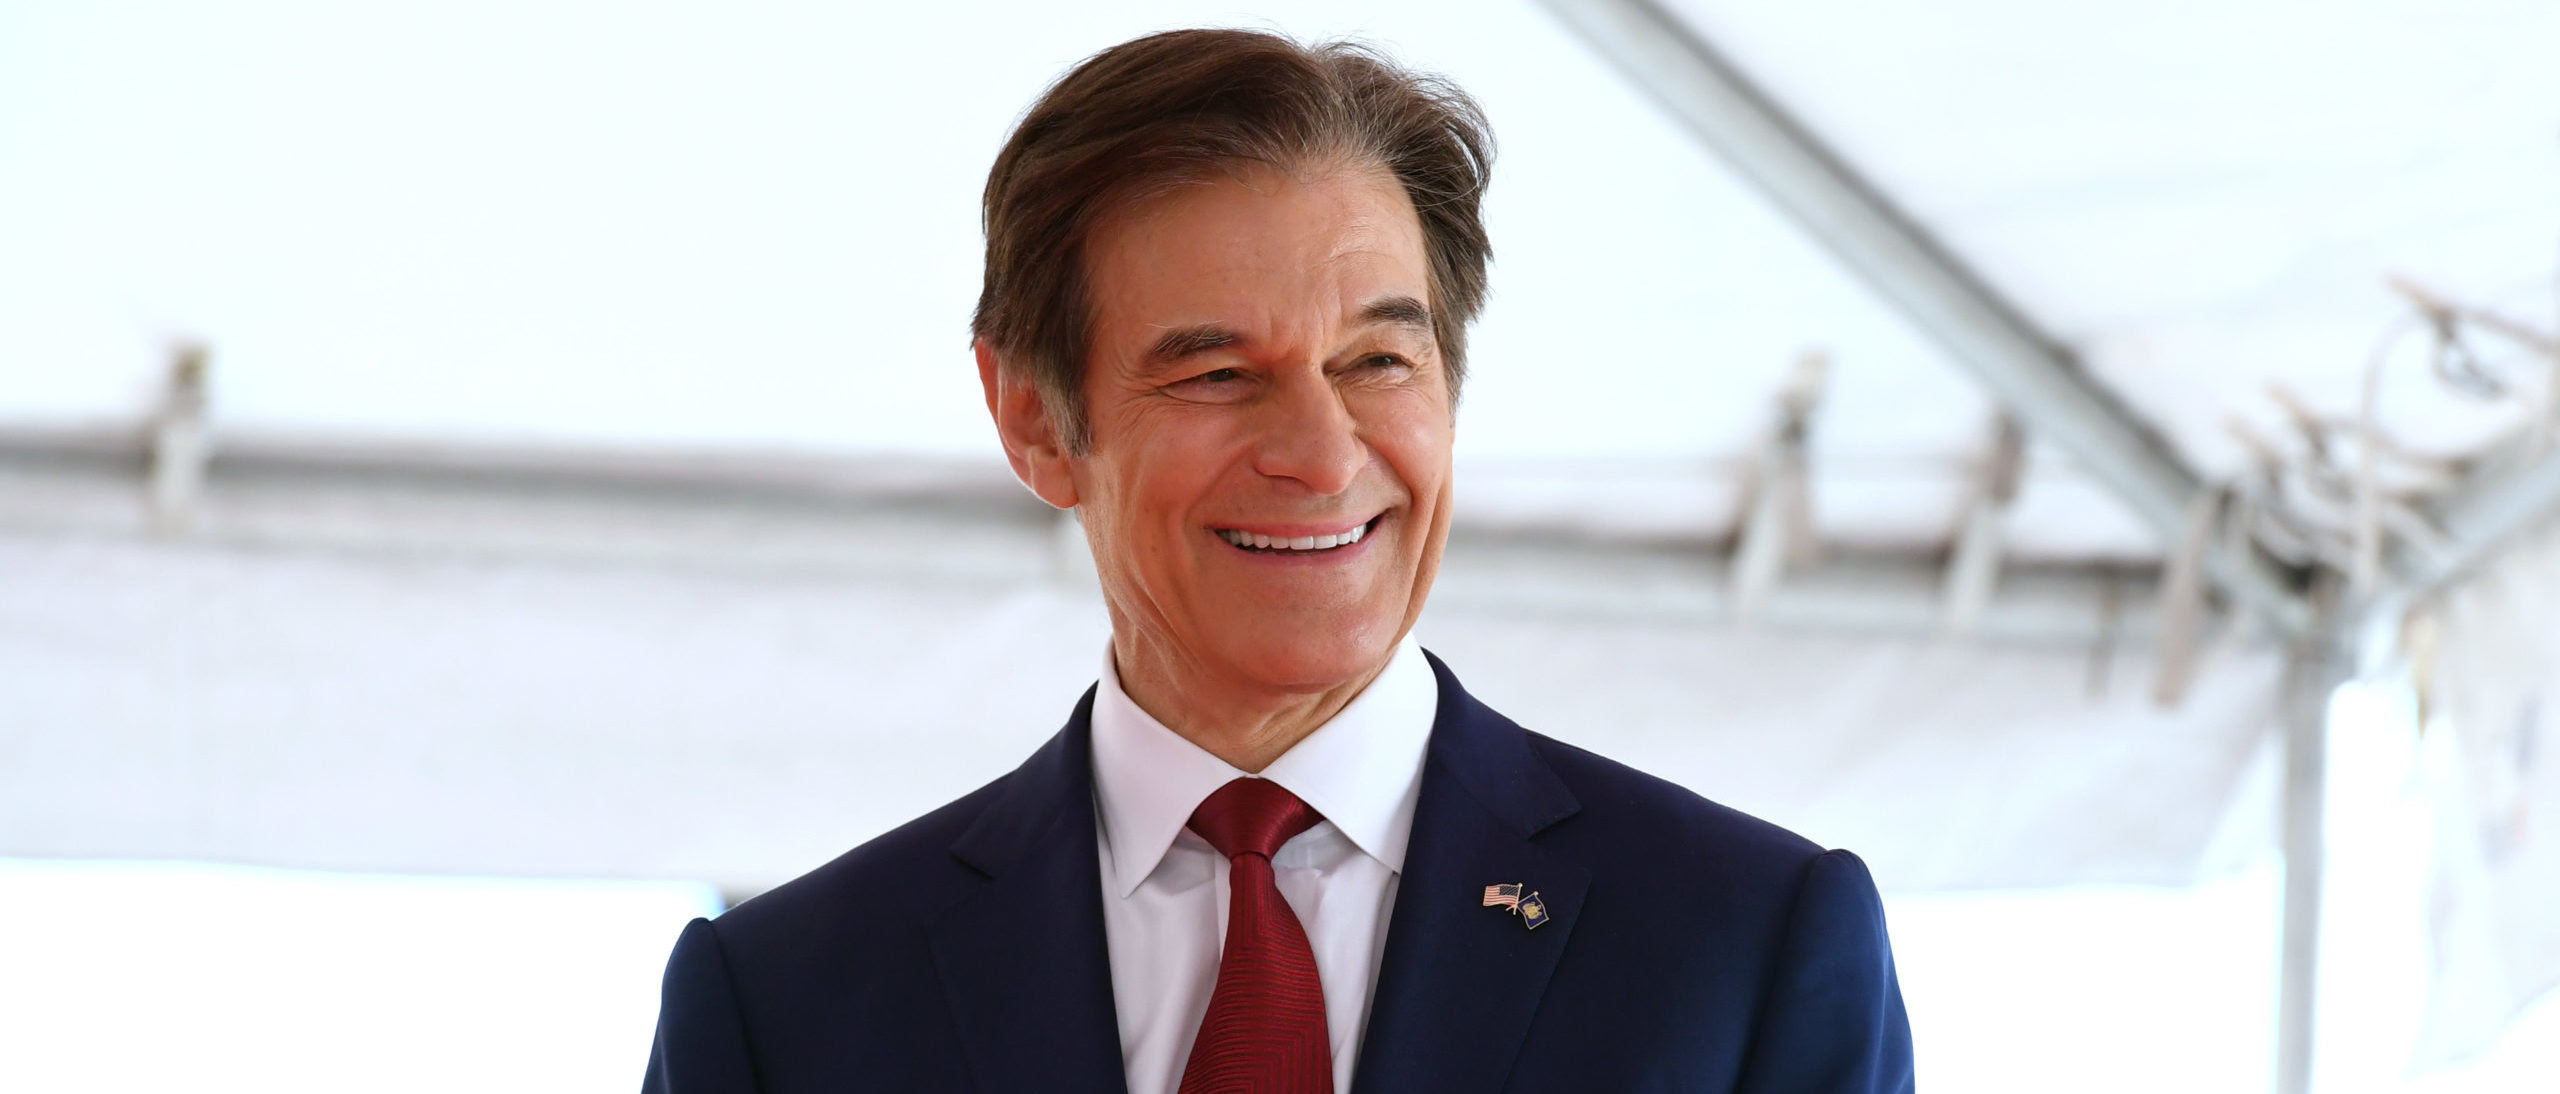 Can Dr. Oz Turn His Campaign Around?